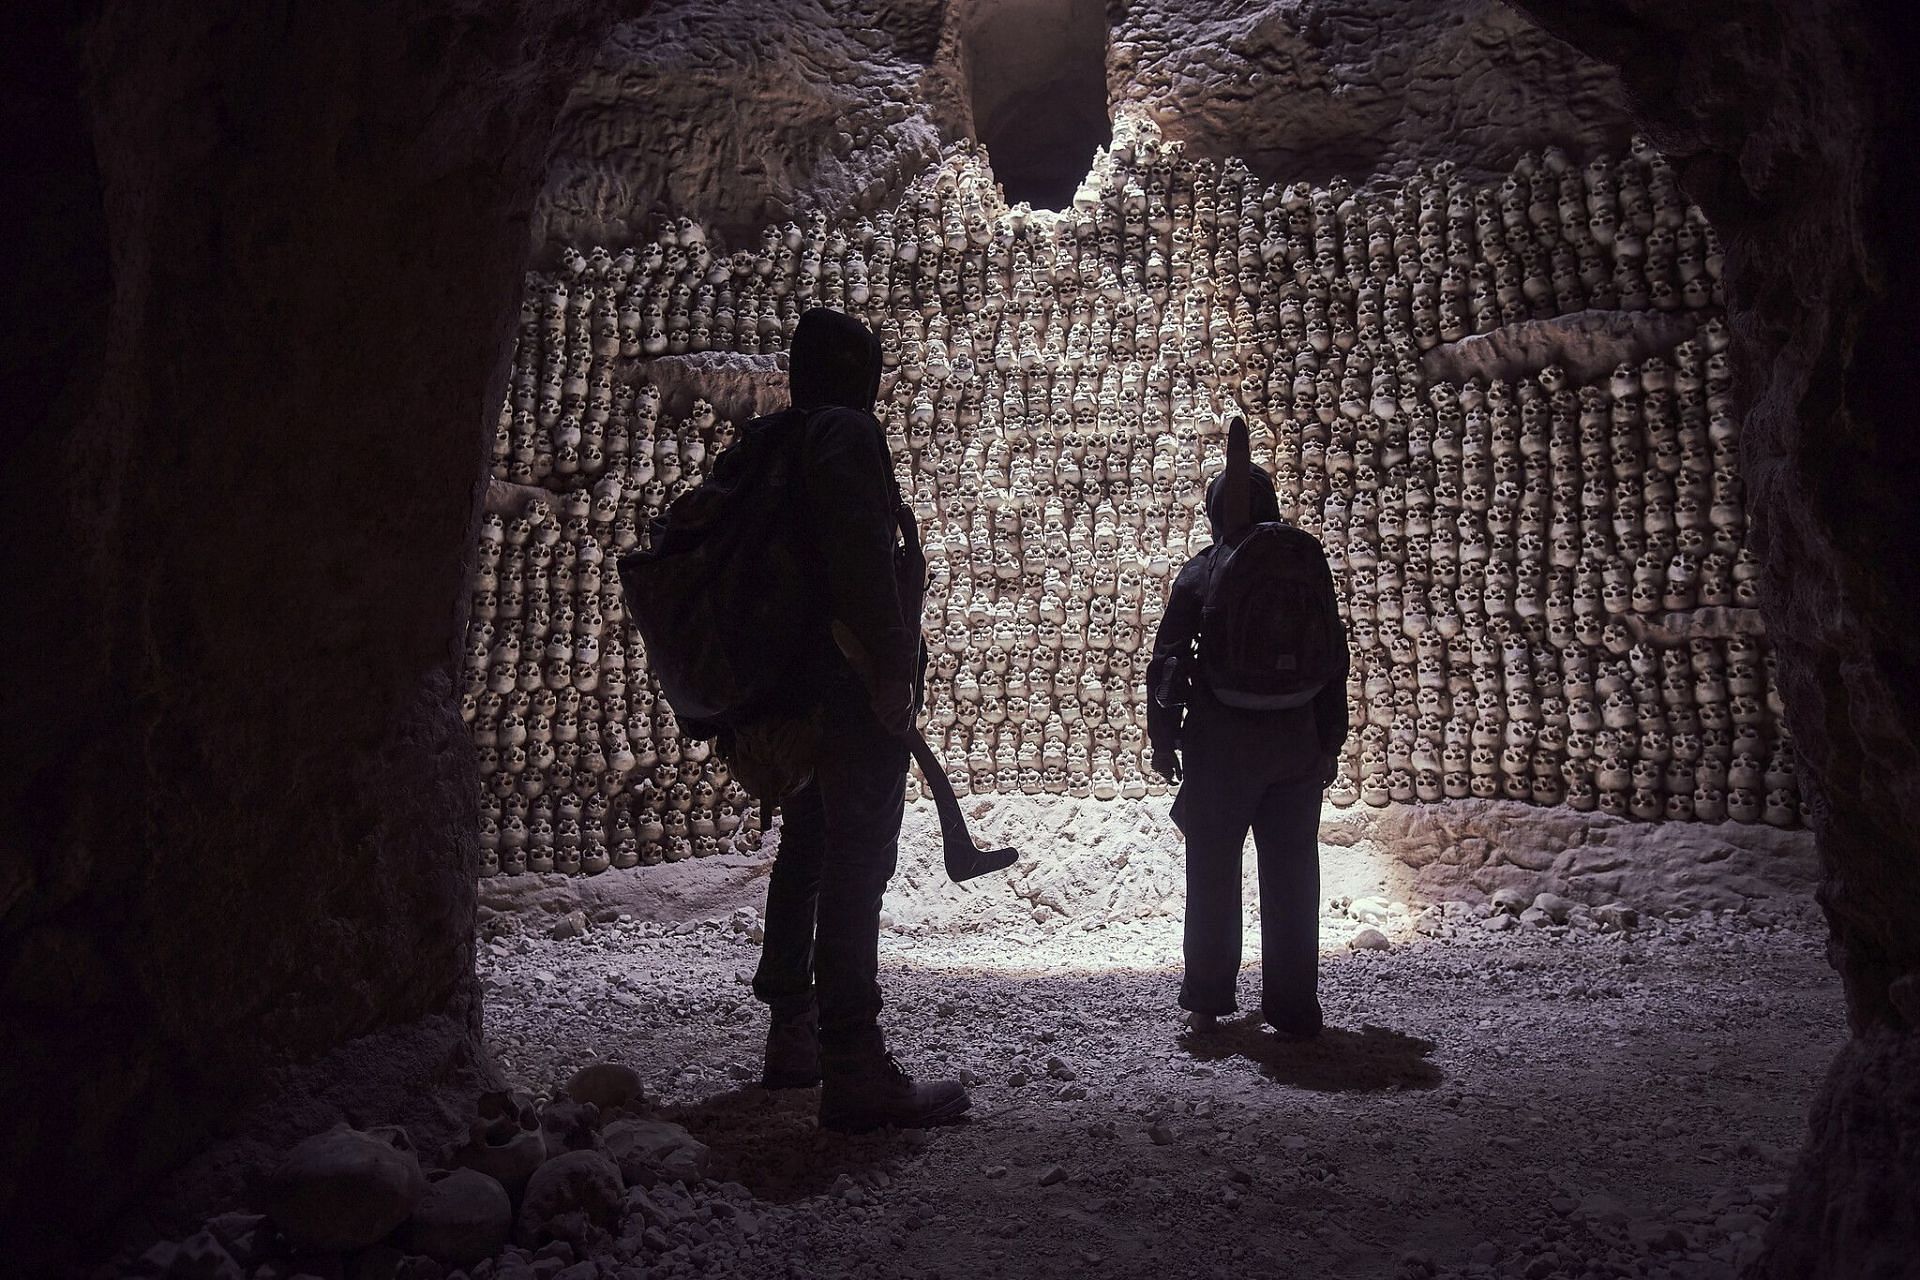 The wall of skulls (Picture used courtesy of AMC Networks)